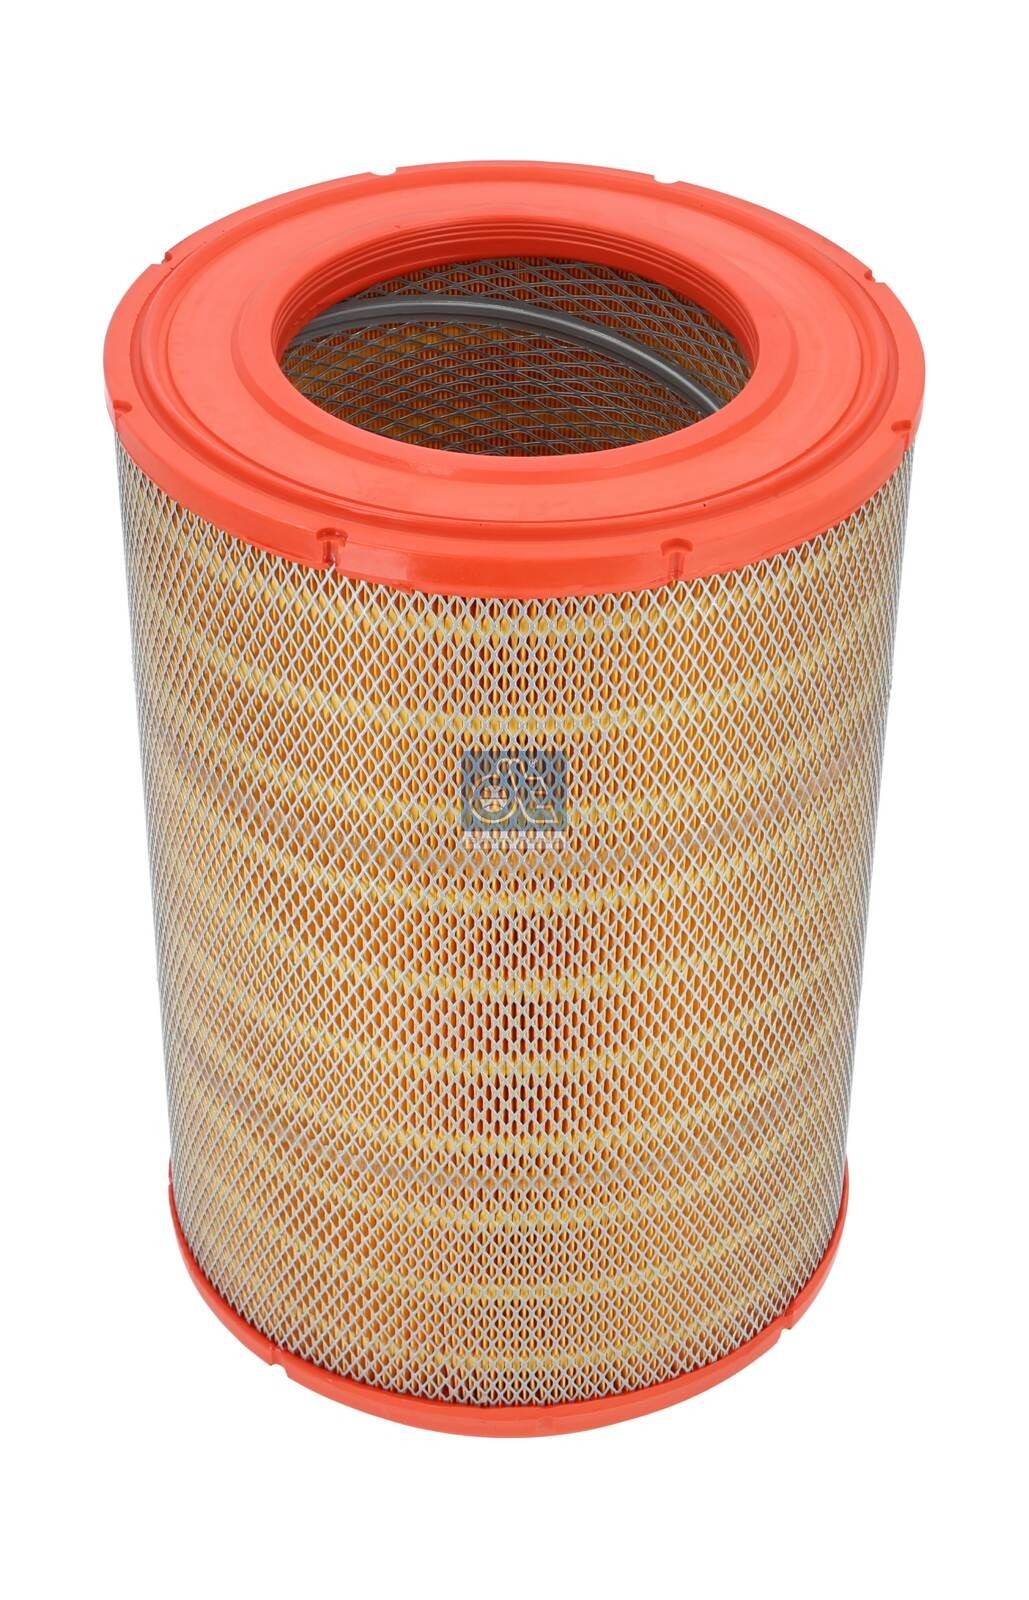 C 31 1254 DT Spare Parts 463mm, 309mm, Filter Insert Height: 463mm Engine air filter 1.10277 buy